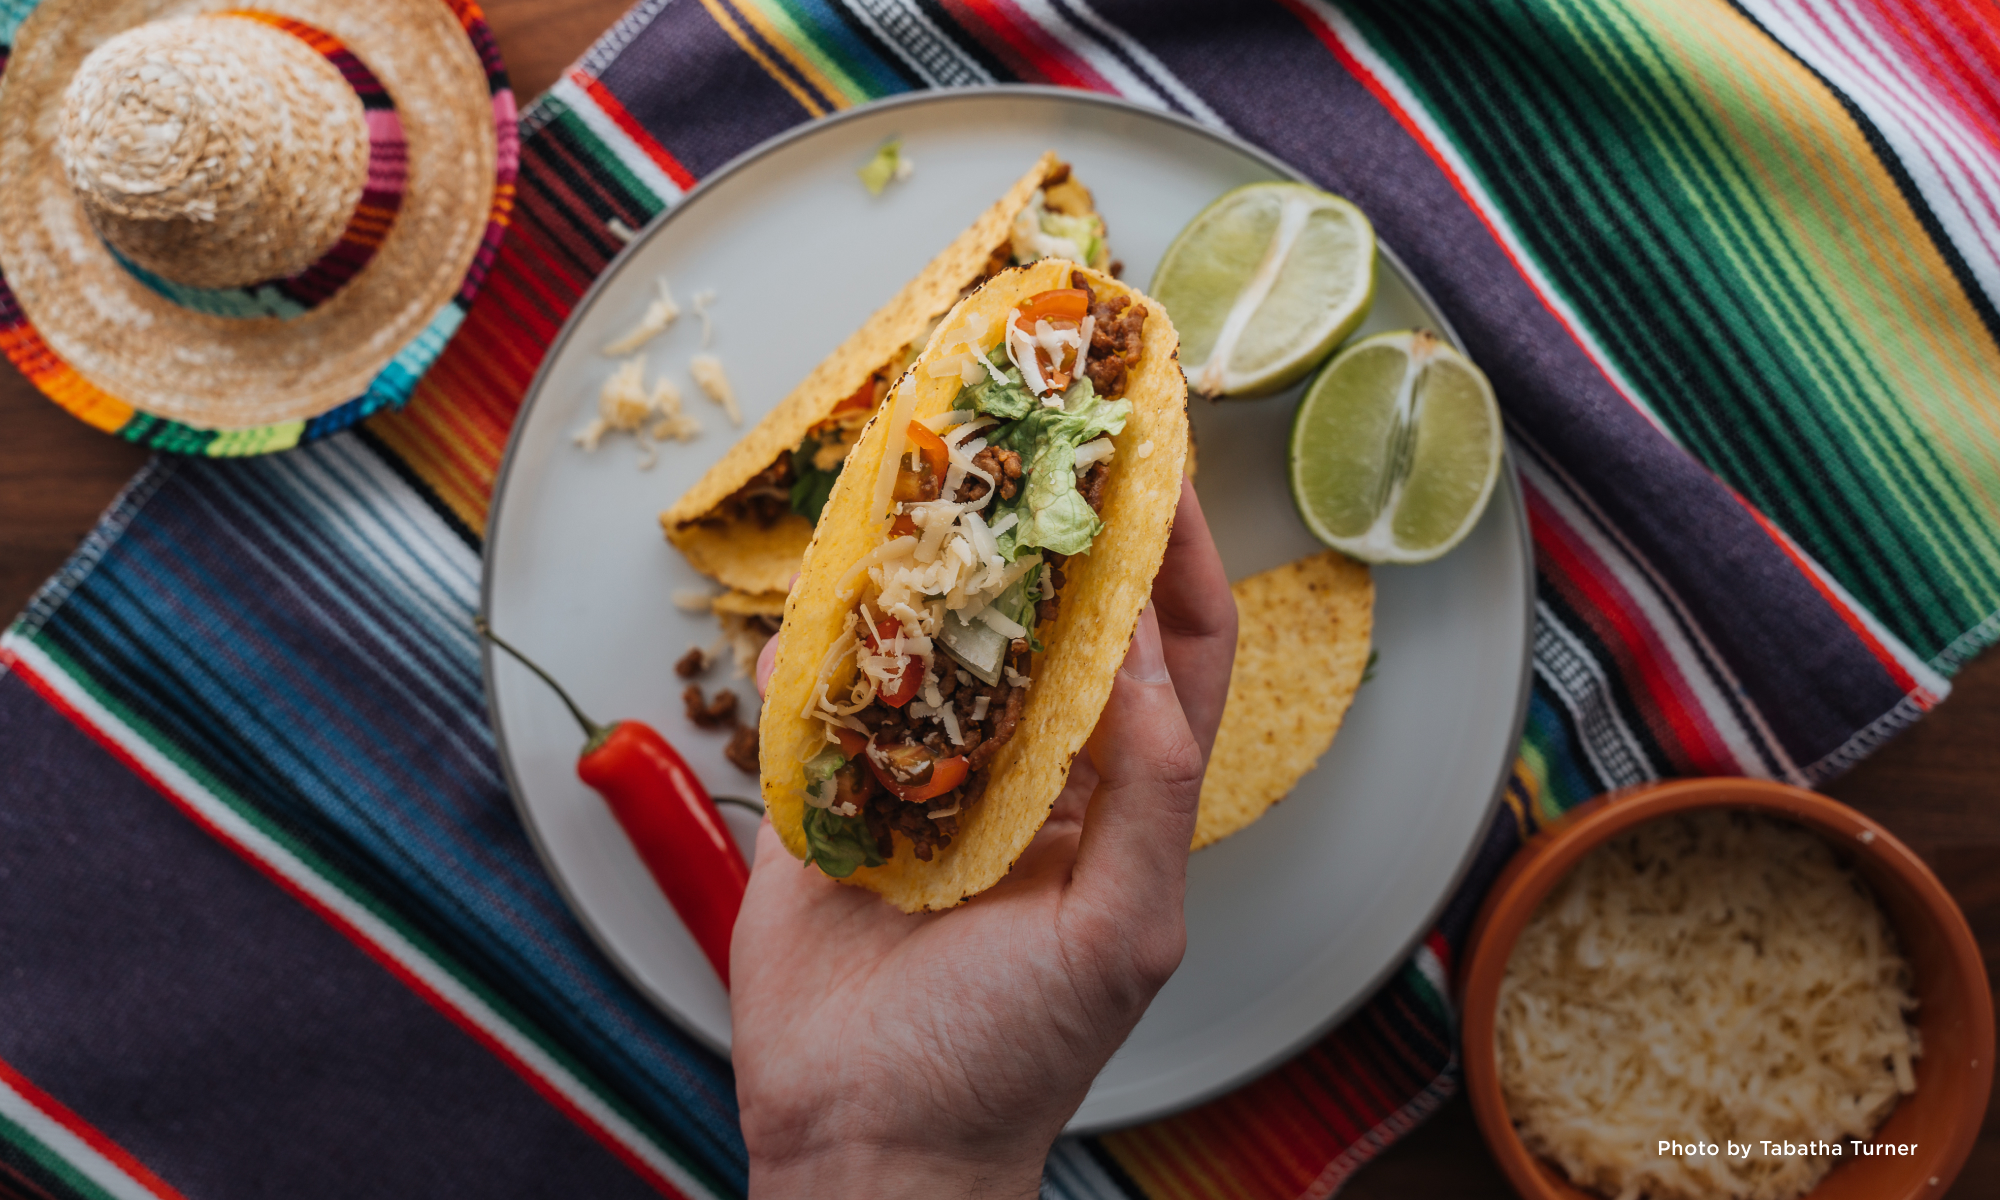 Overhead view of a hand holding a stuffed taco over a plate on a colorful tablecloth.